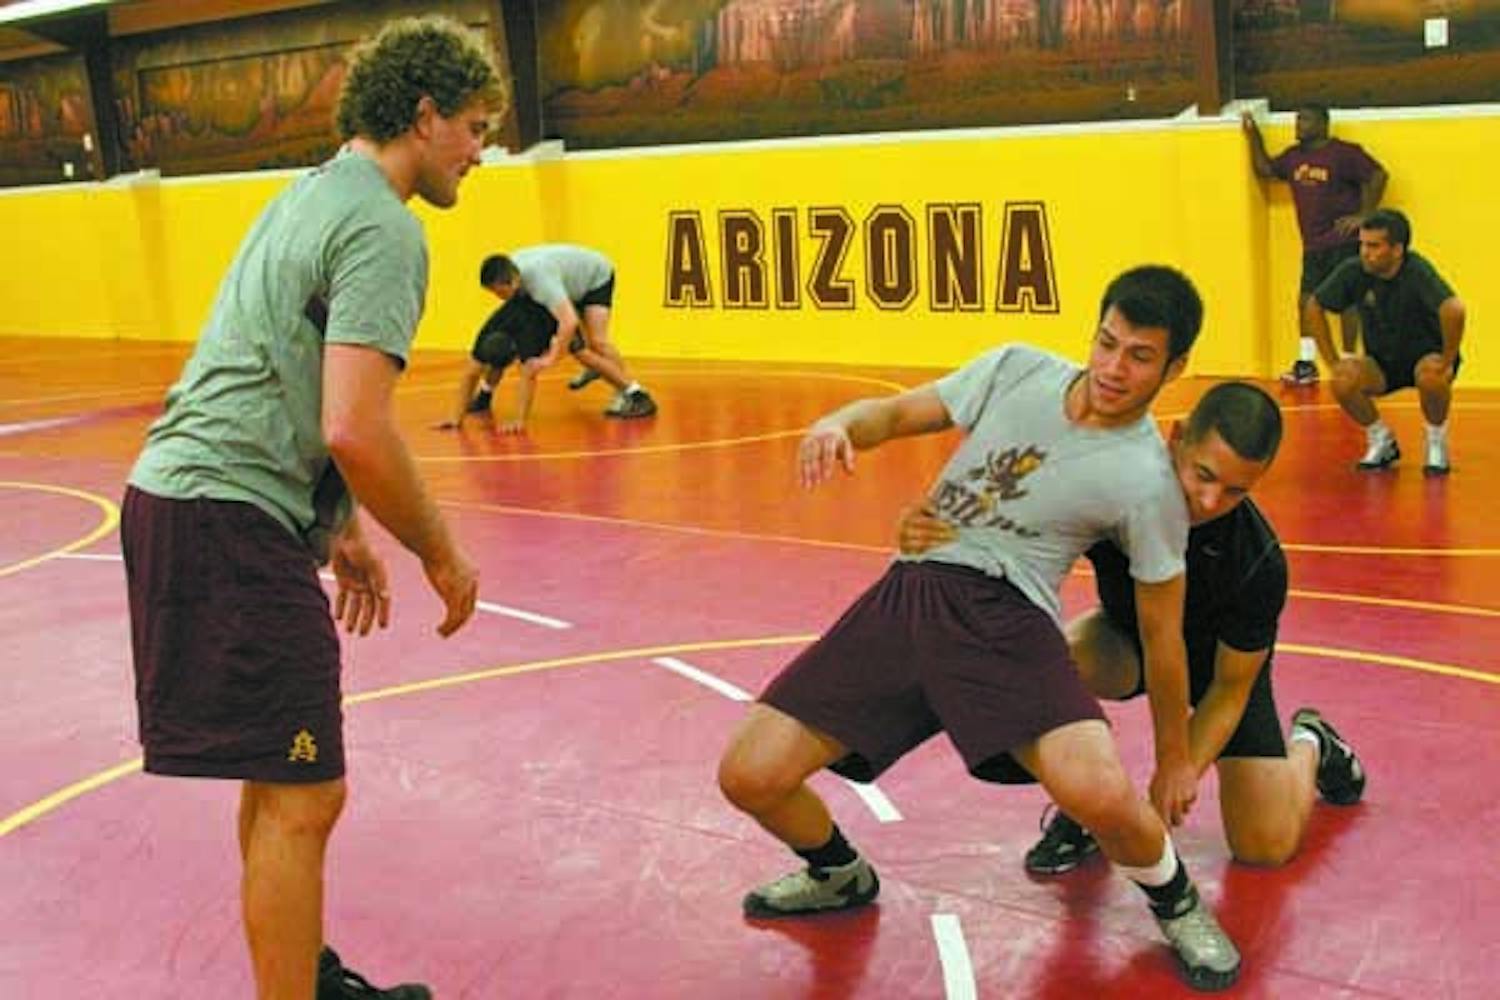 Sharing the Knowledge: After dominating the college stage and competing in the Beijing Olympics, ASU assistant coach Ben Askren (left) now puts his efforts into teaching young wrestlers on the ASU squad. (Photo by Annie Wechter)